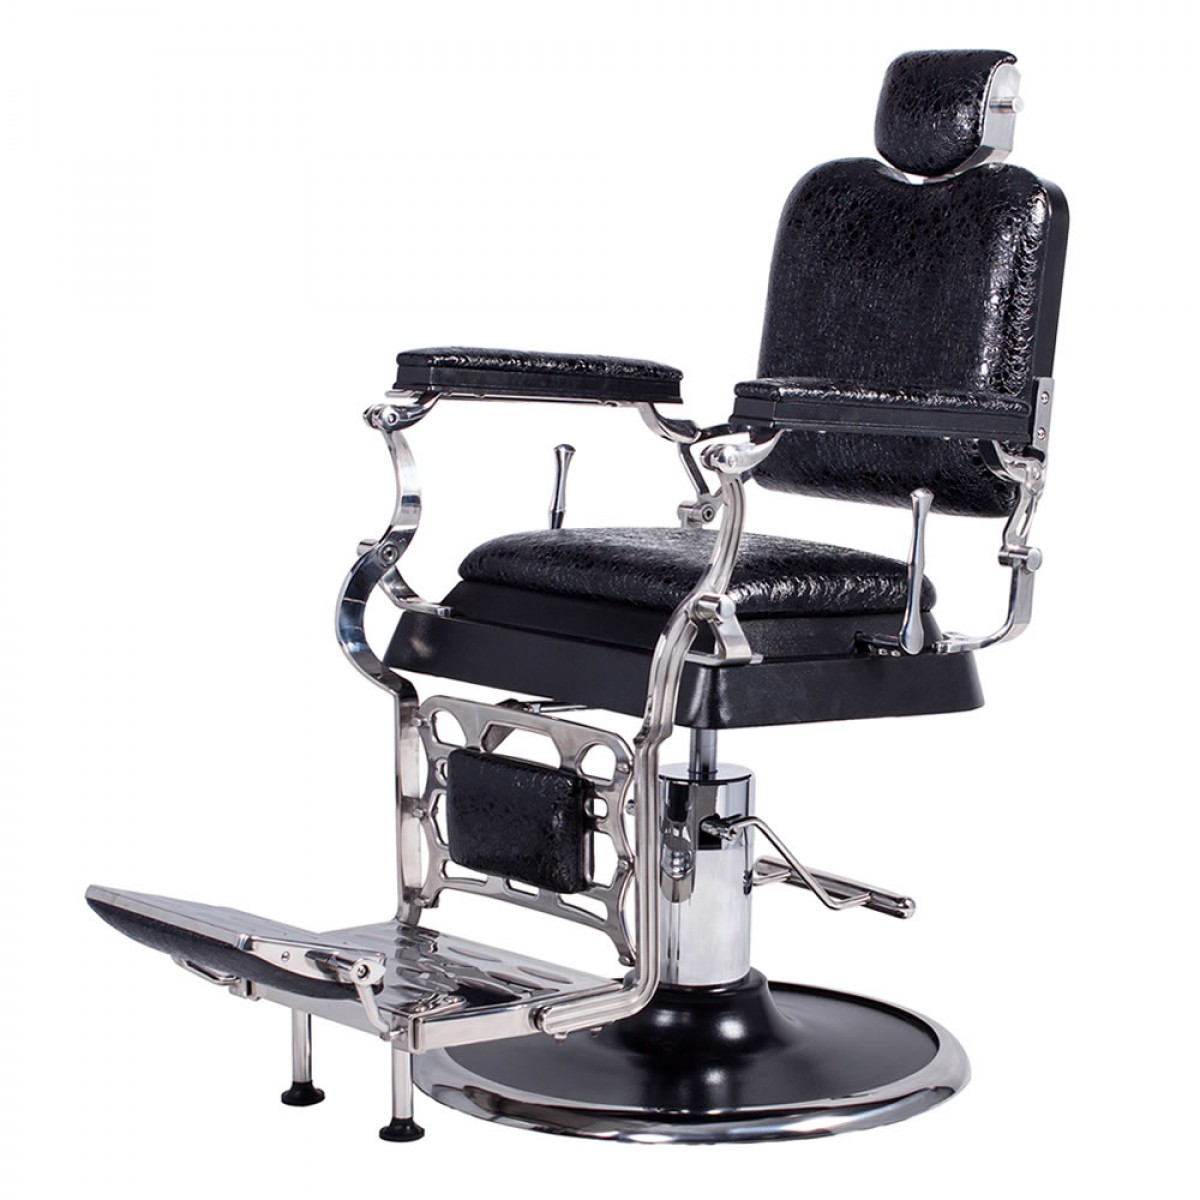 Emperor Antique Barber Chair Antique Barber Chairs Barbershop